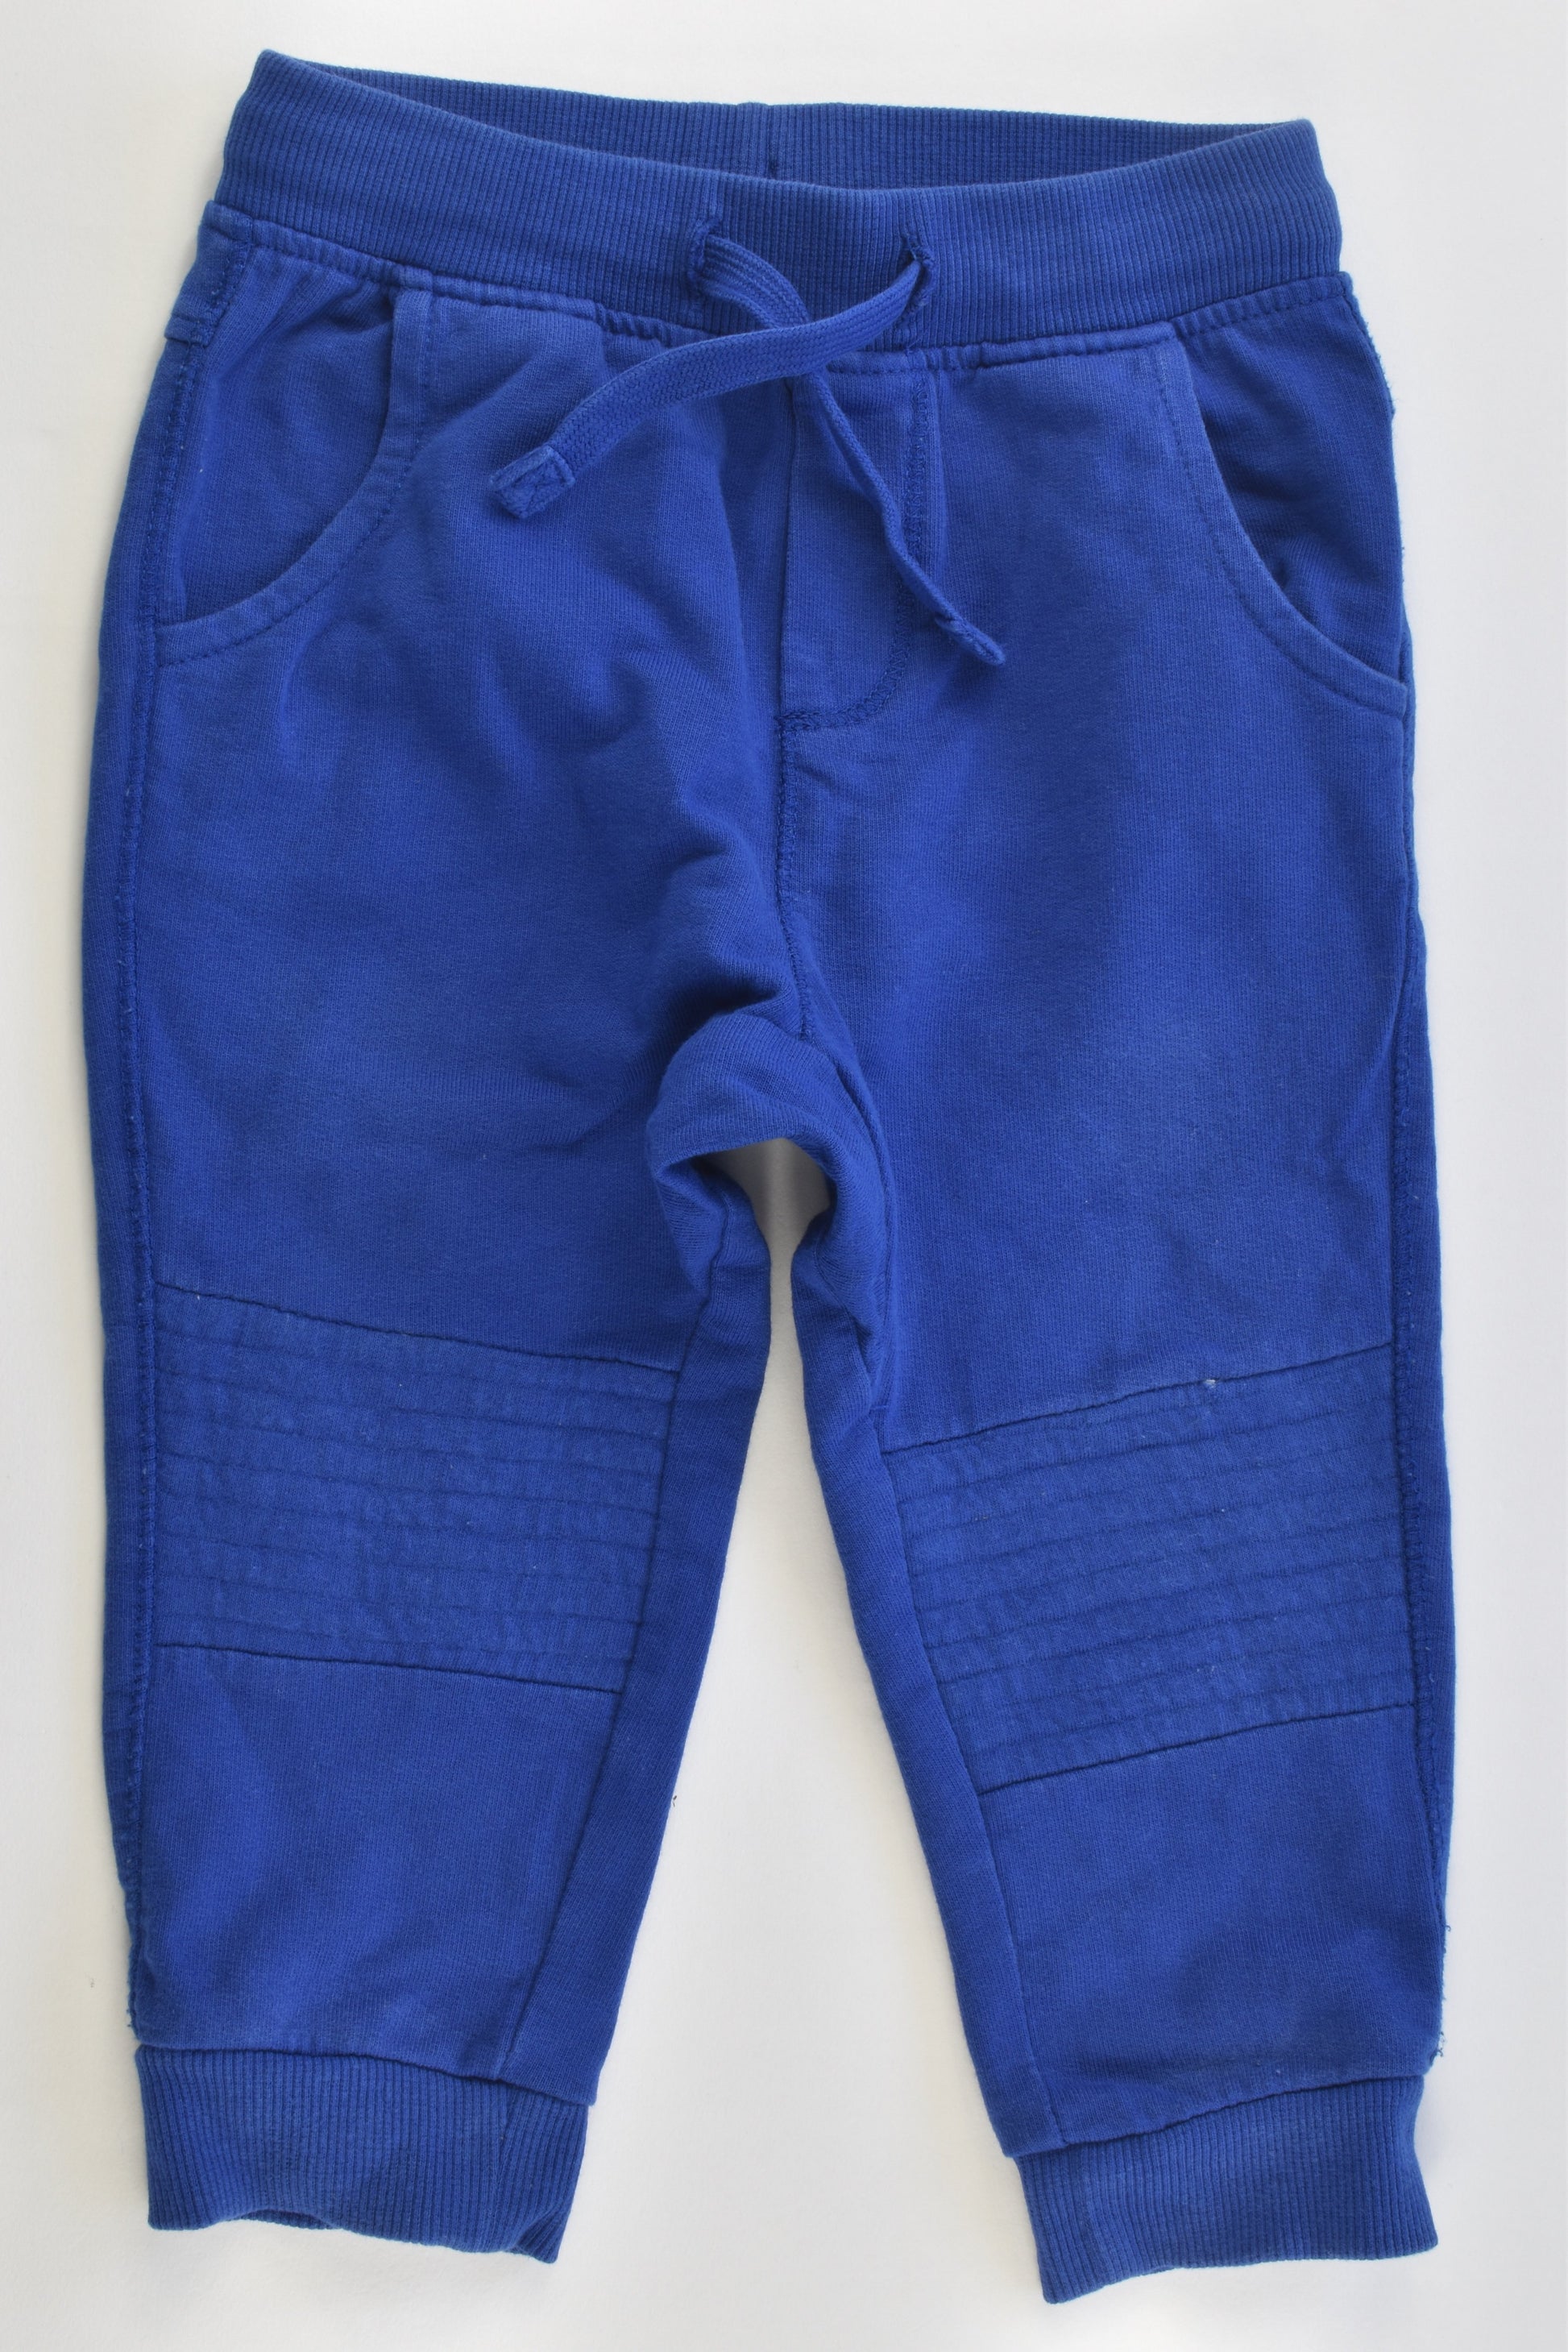 Fagottino (Italy) Size 1 (12-18 months, 80 cm) Track Pants